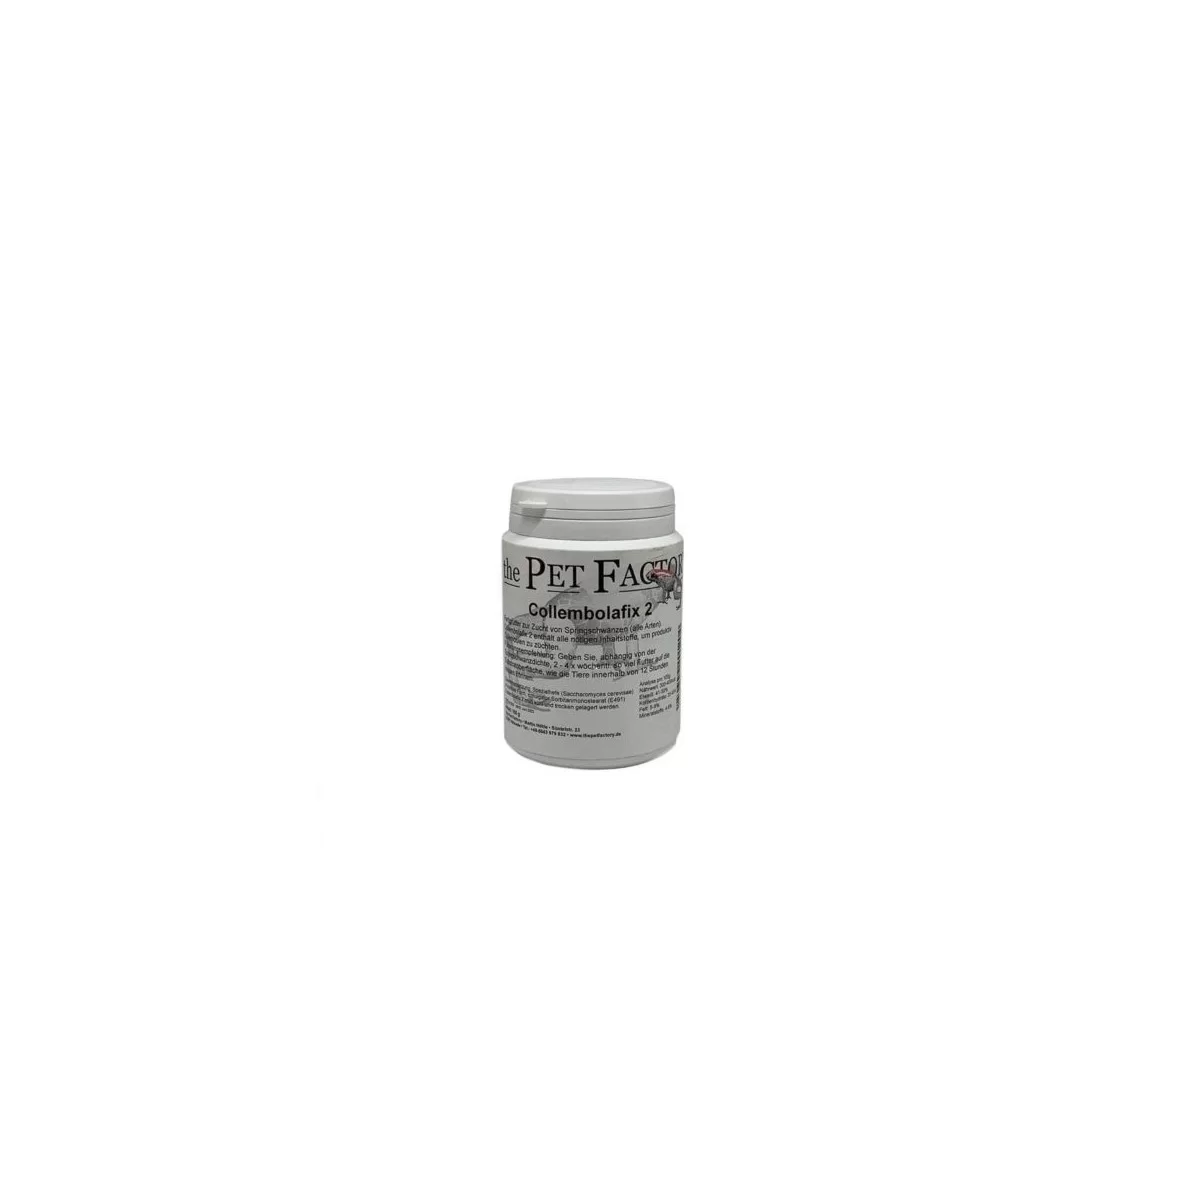 The Pet Factory - Collembolafix 2 150g